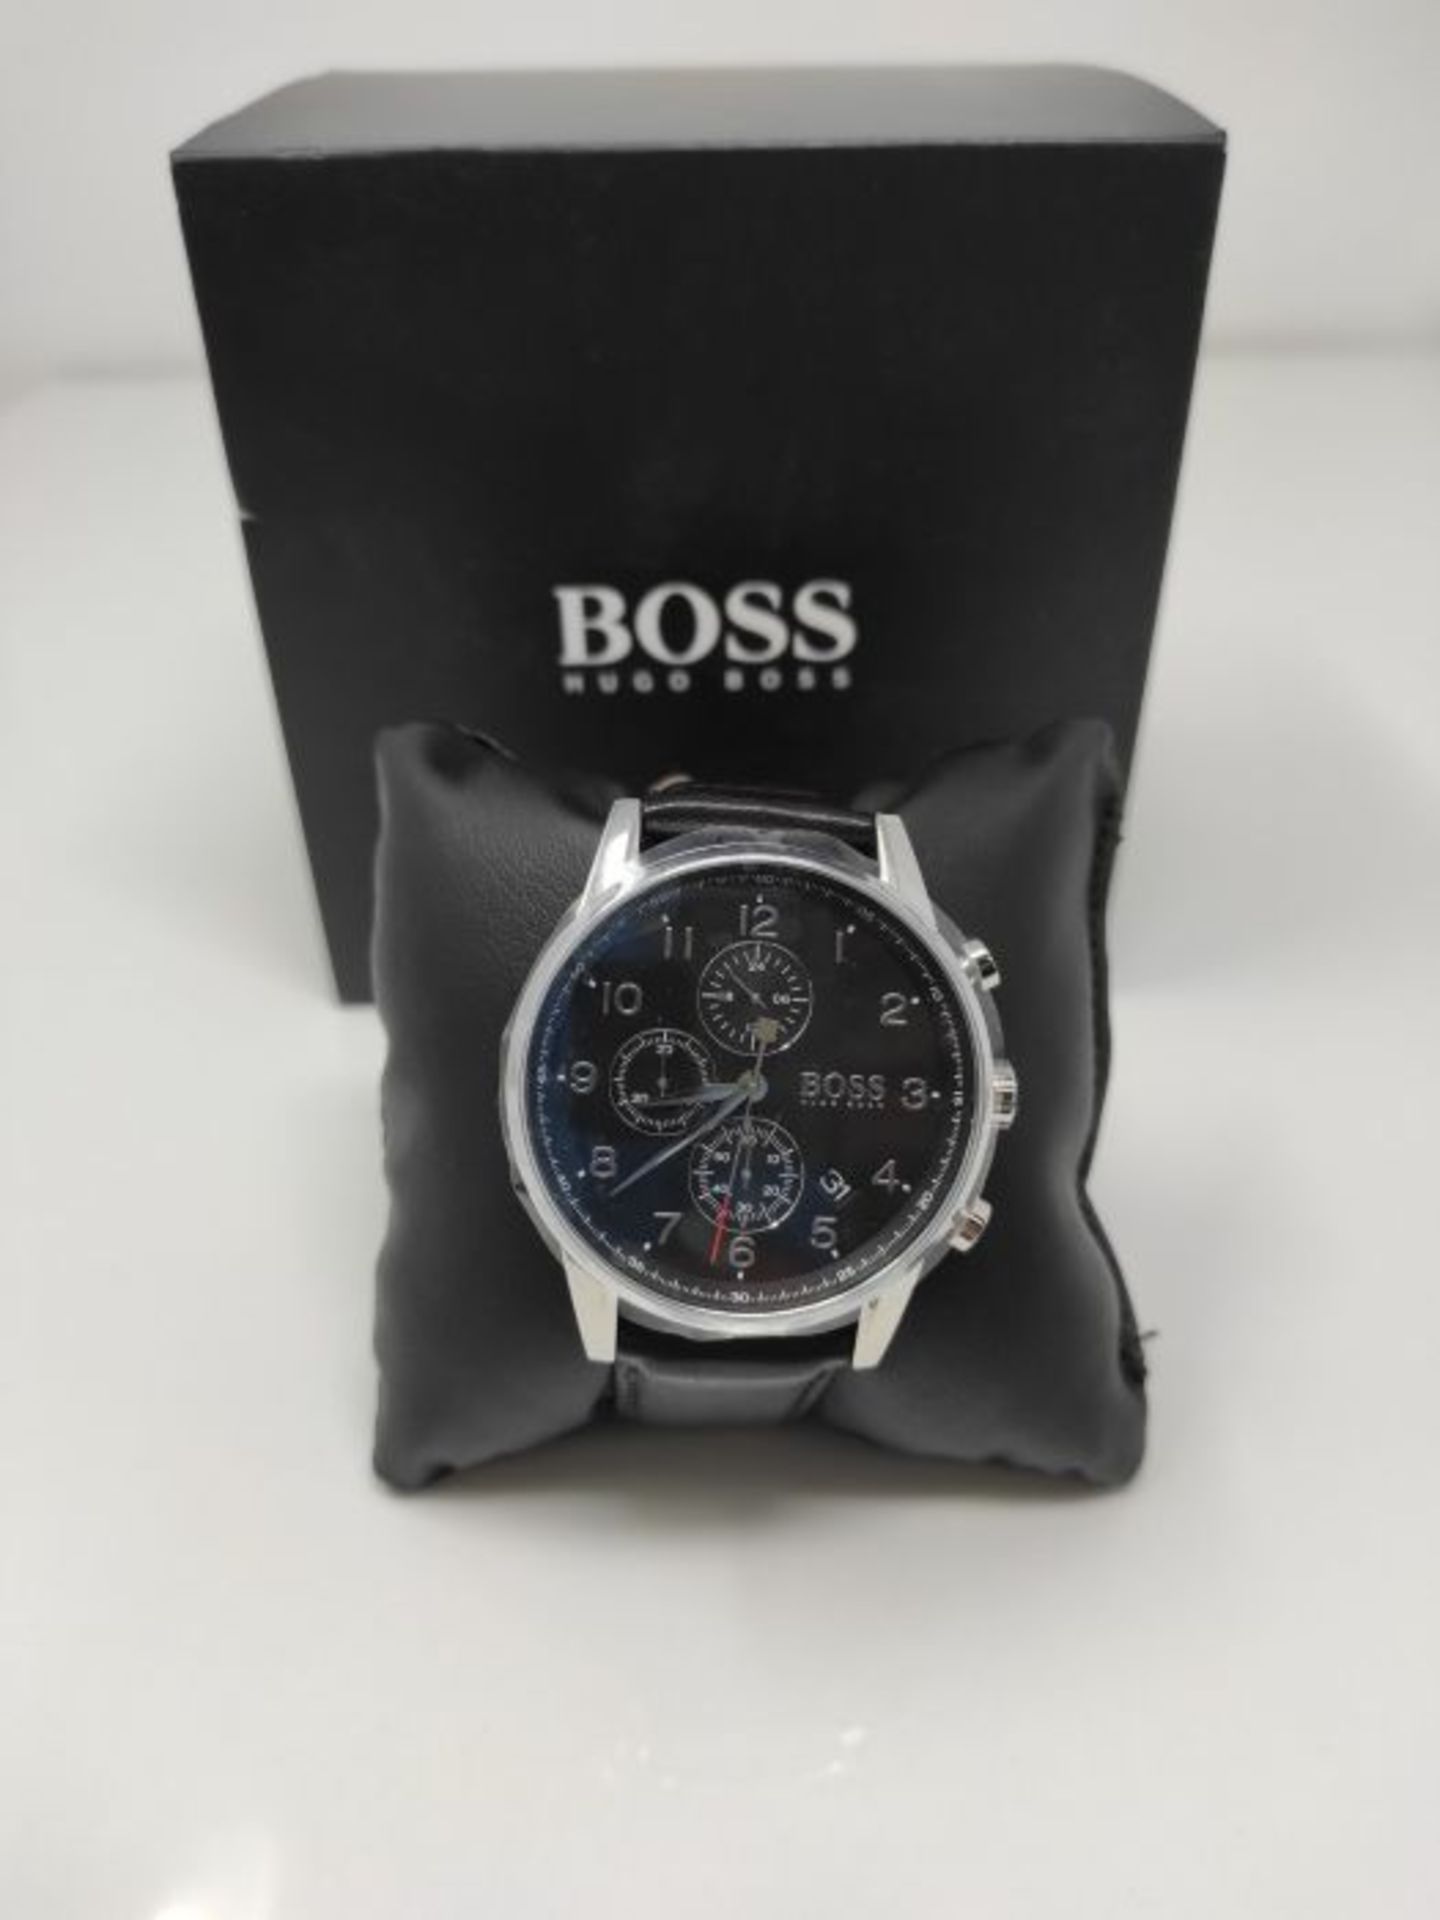 RRP £239.00 BOSS Watches Men's Chronograph Quartz Watch with Leather Strap 1513678 - Image 2 of 3